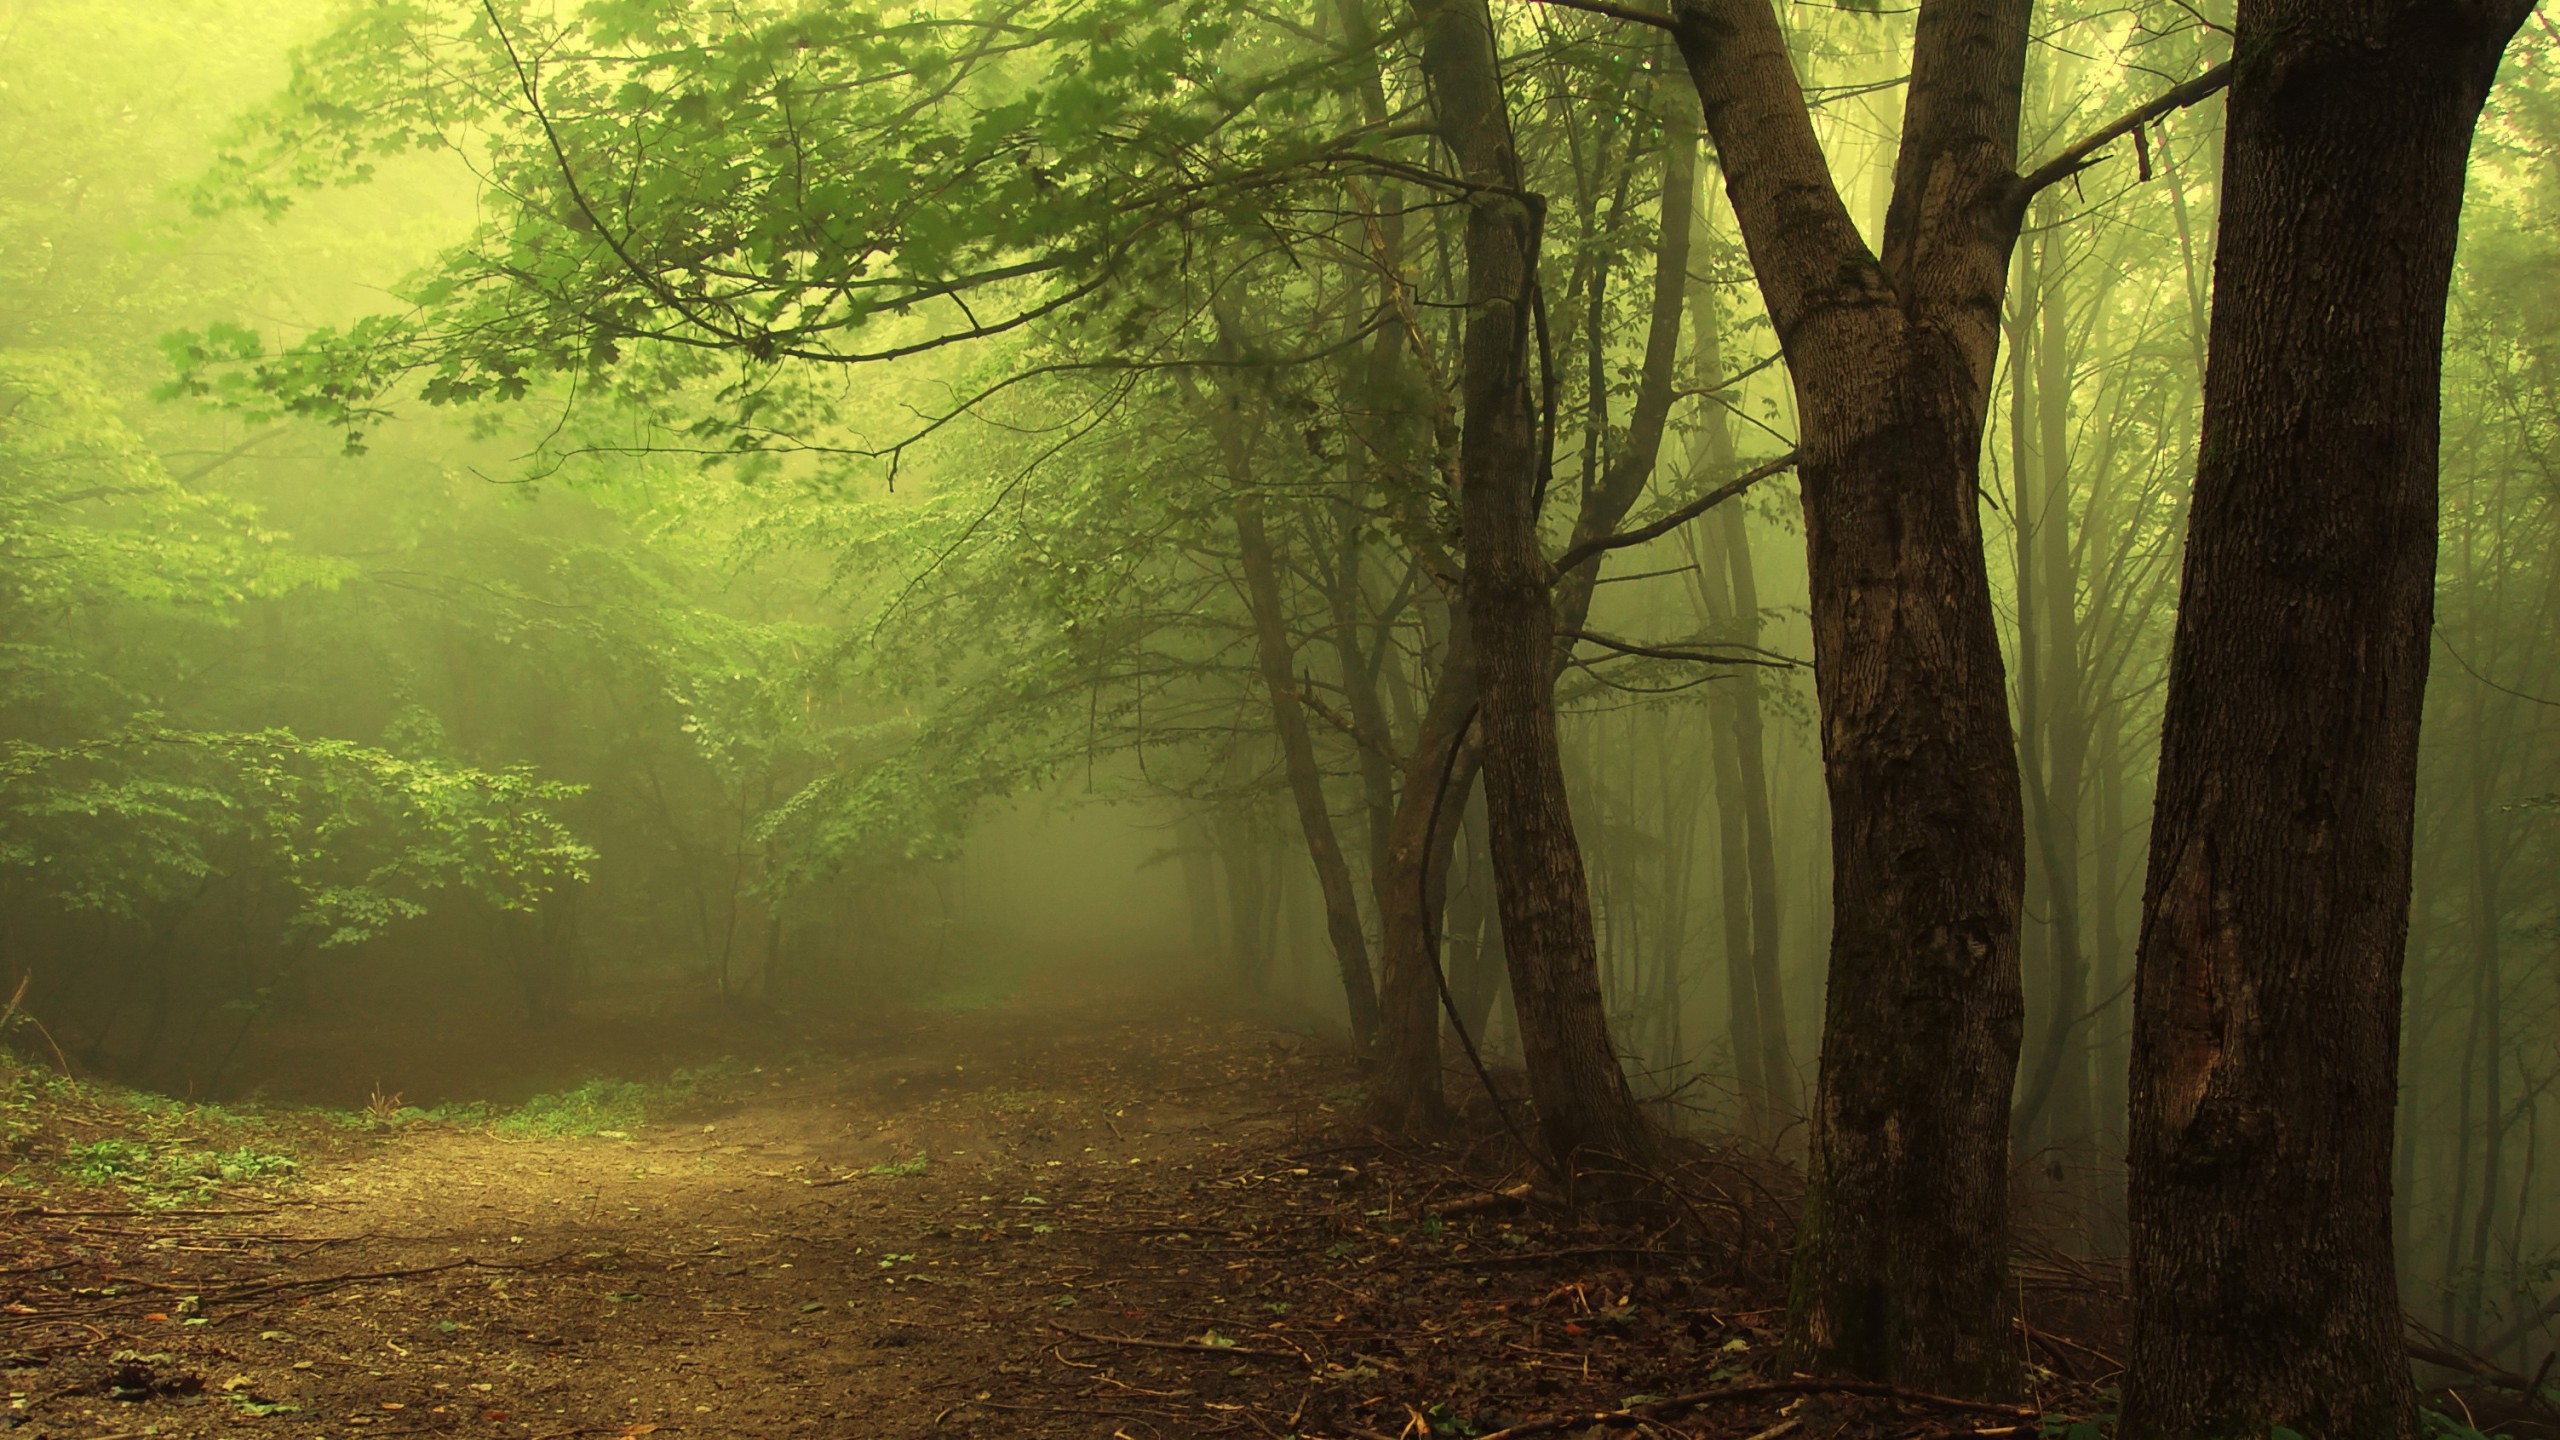 General 2560x1440 forest nature trees mist